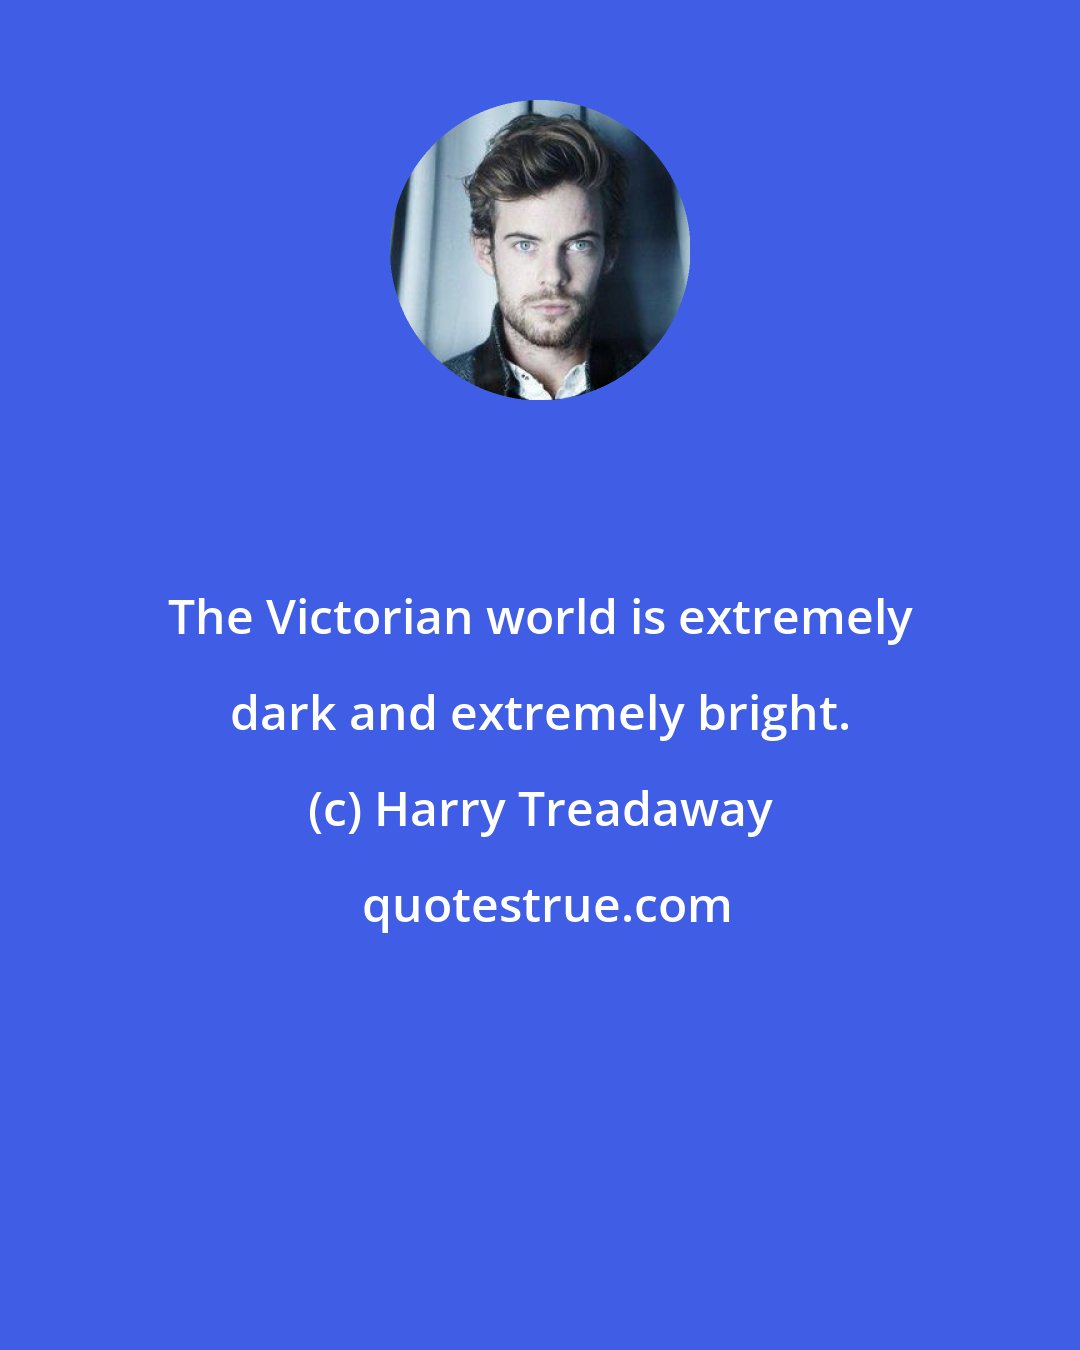 Harry Treadaway: The Victorian world is extremely dark and extremely bright.